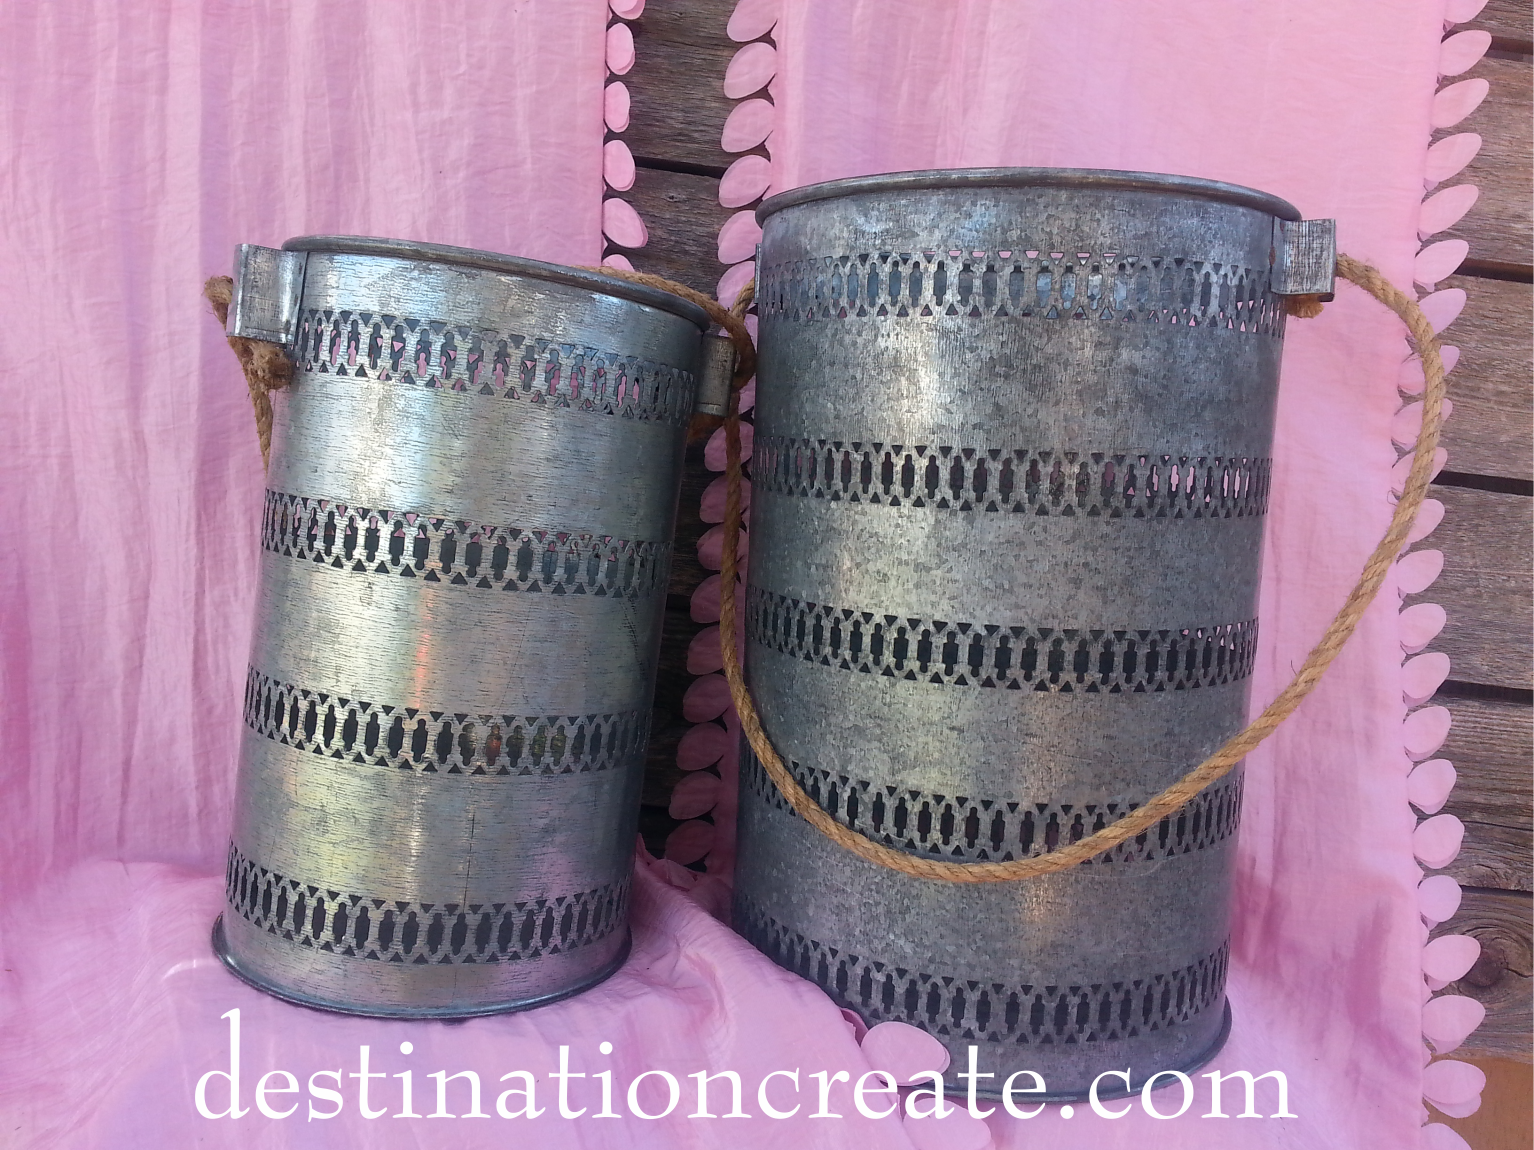 Wedding Decor Rentals-rent galvanized lanterns for a rustic chic wedding or party